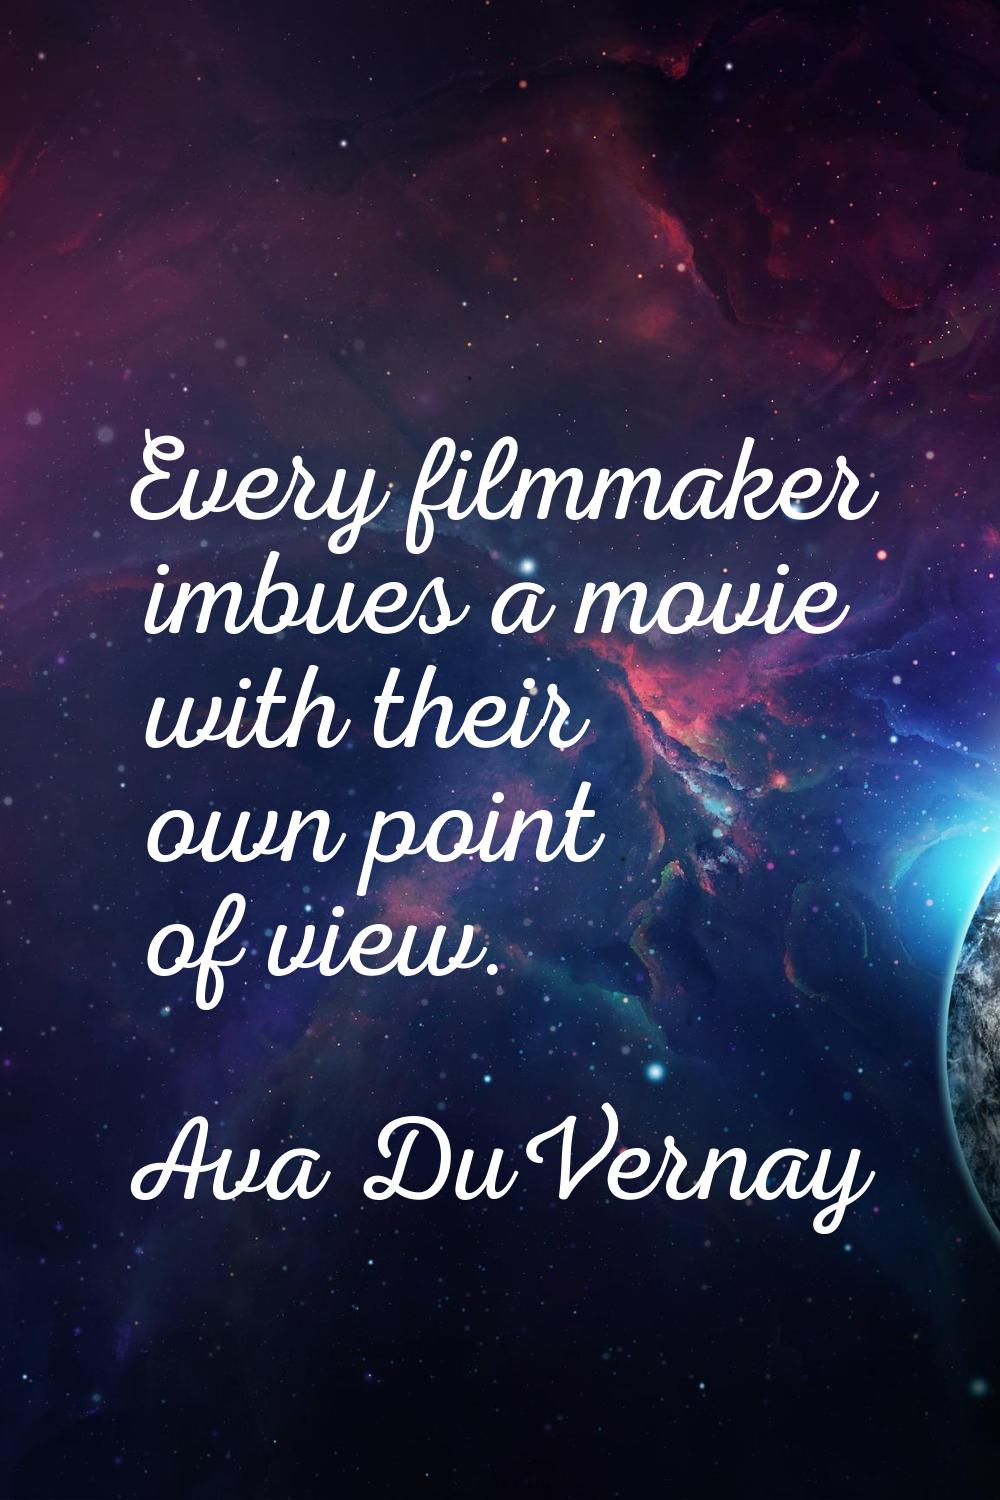 Every filmmaker imbues a movie with their own point of view.